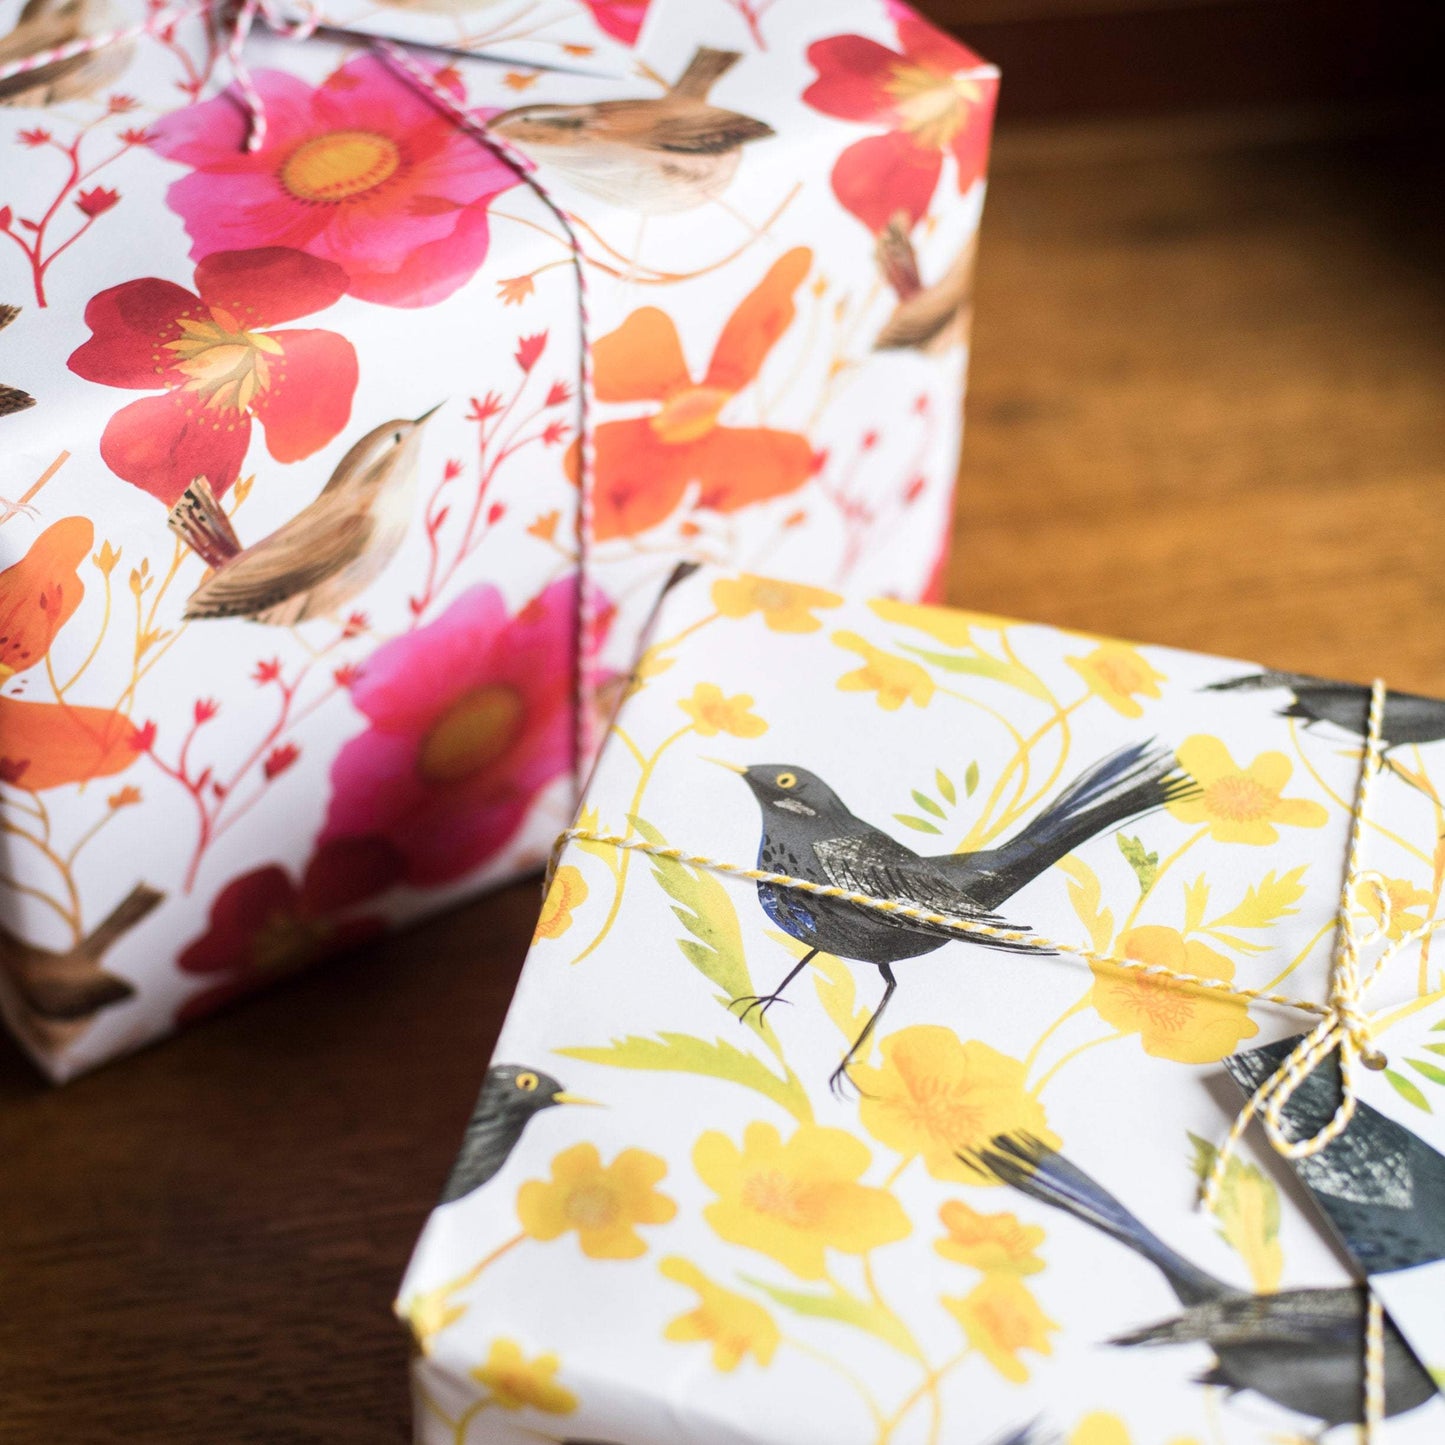 Blackbirds and Buttercups Luxury, 100% Recycled Wrapping Paper